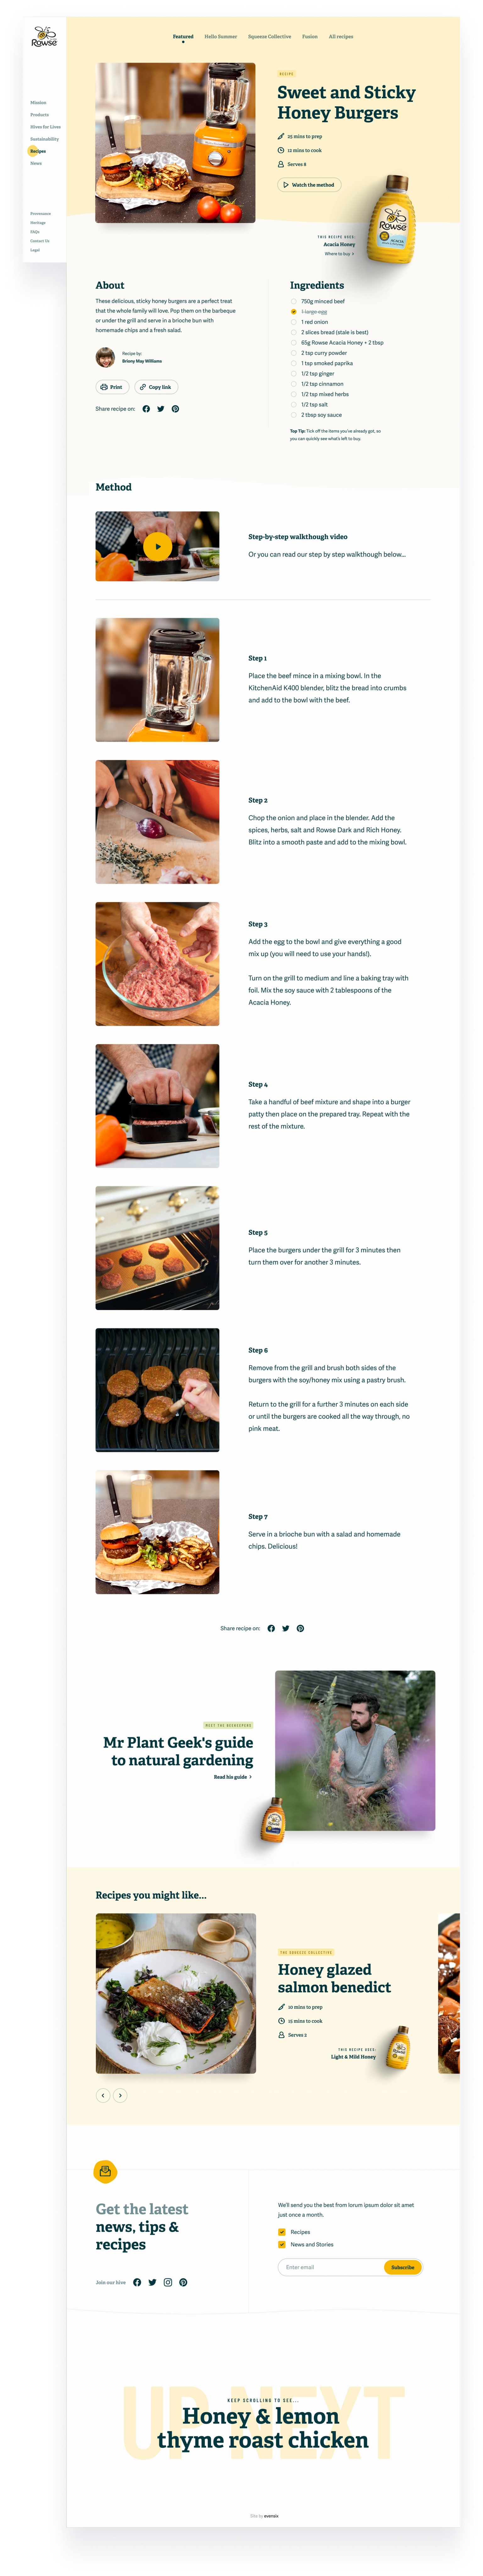 Desktop screenshot of a recipe page from the Rowse Honey website